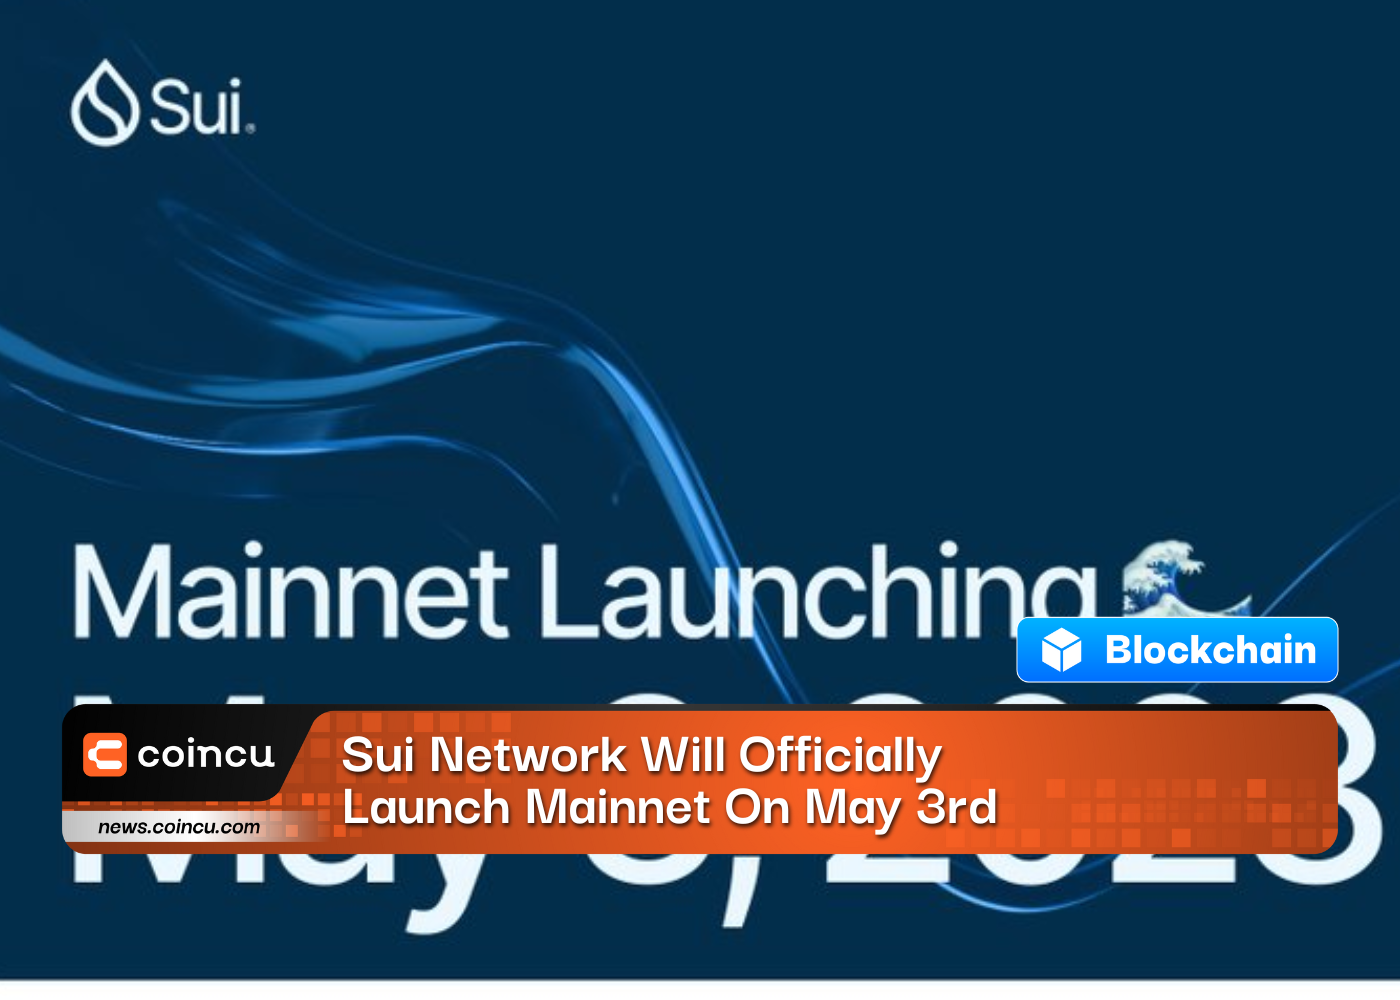 Sui Network Will Officially Launch Mainnet On May 3rd